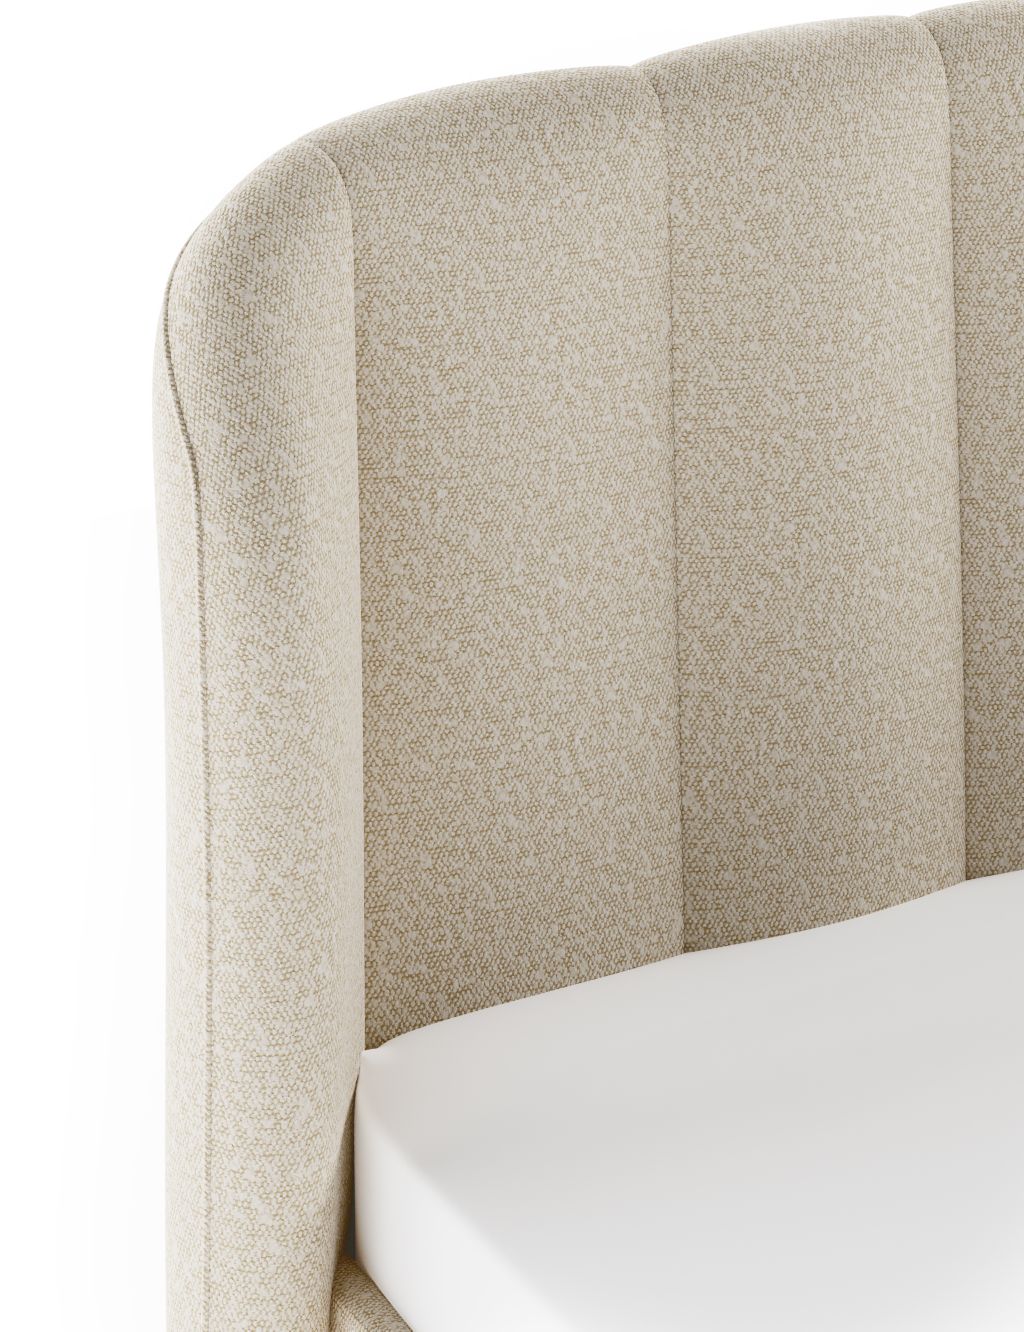 Cassis Upholstered Bed image 5